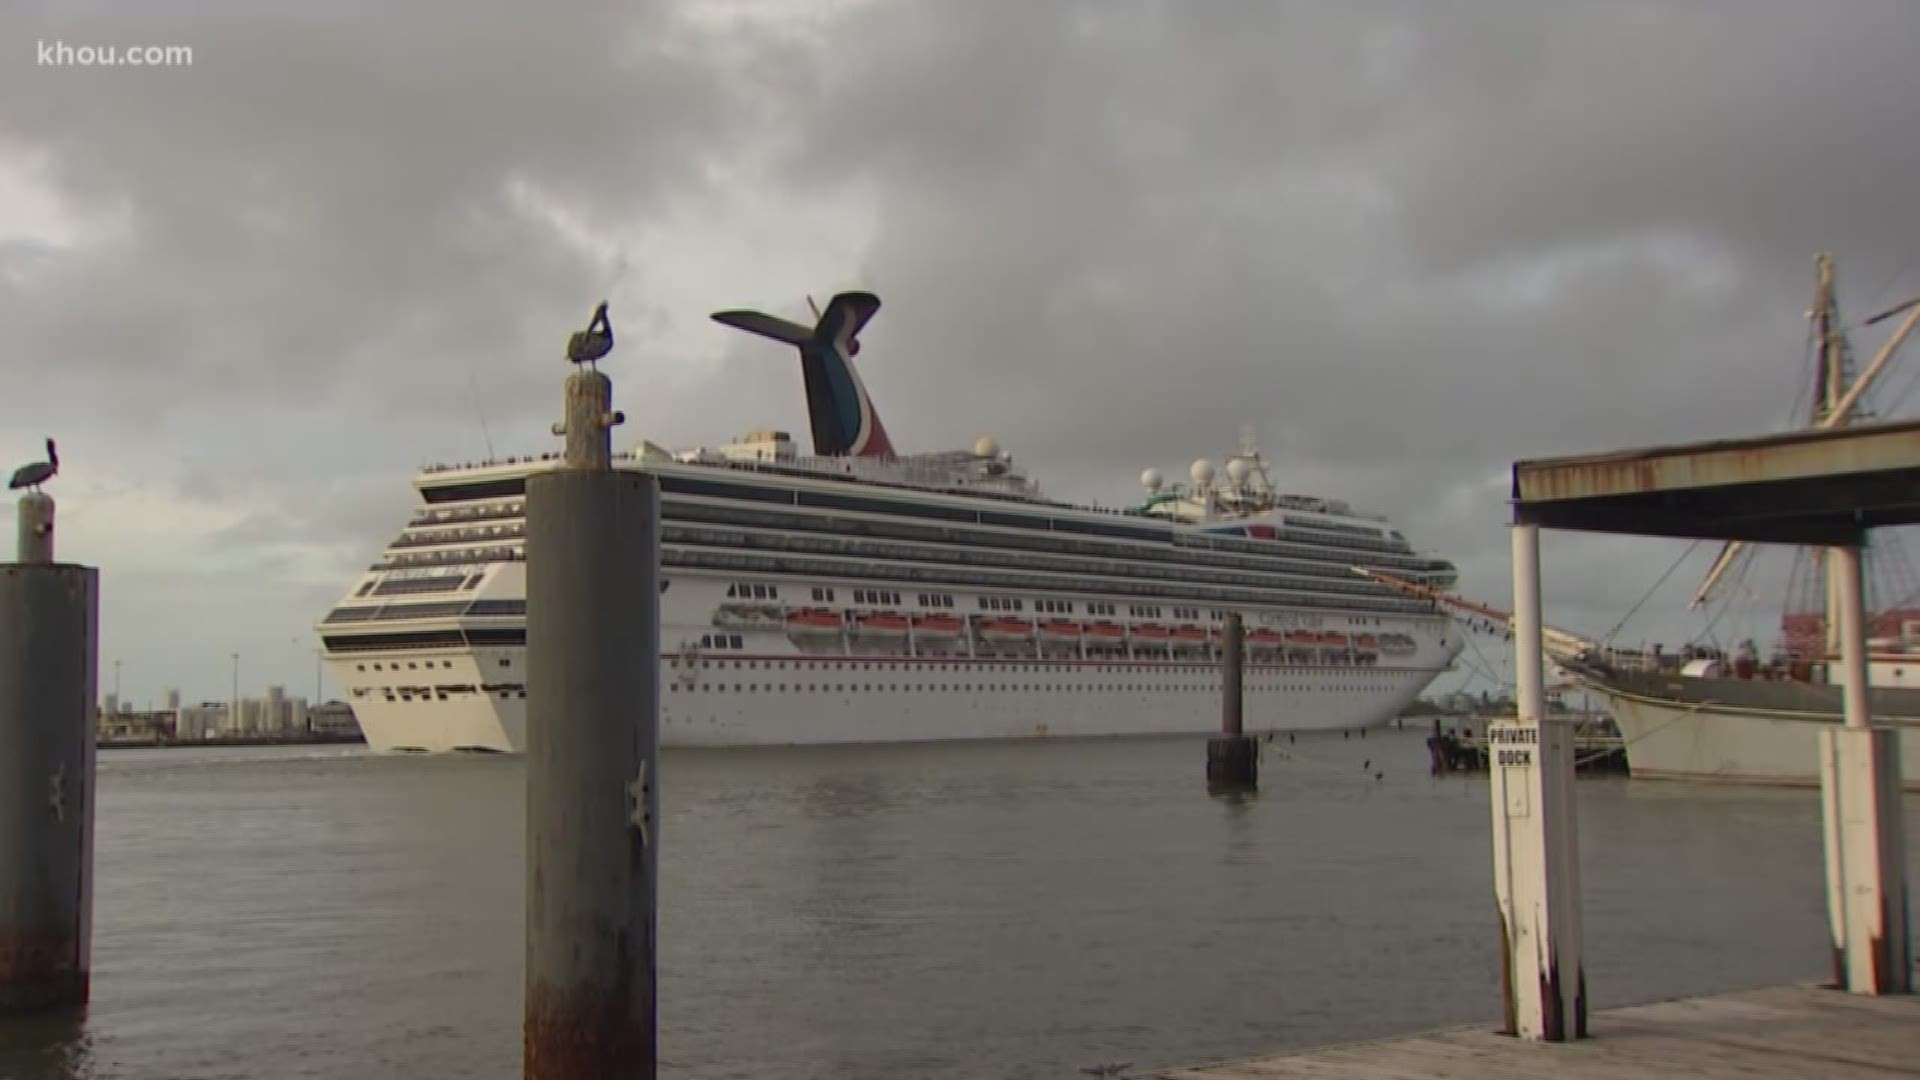 Travel agents in Galveston say they're fielding calls from worried clients concerned about the Wuhan coronavirus.